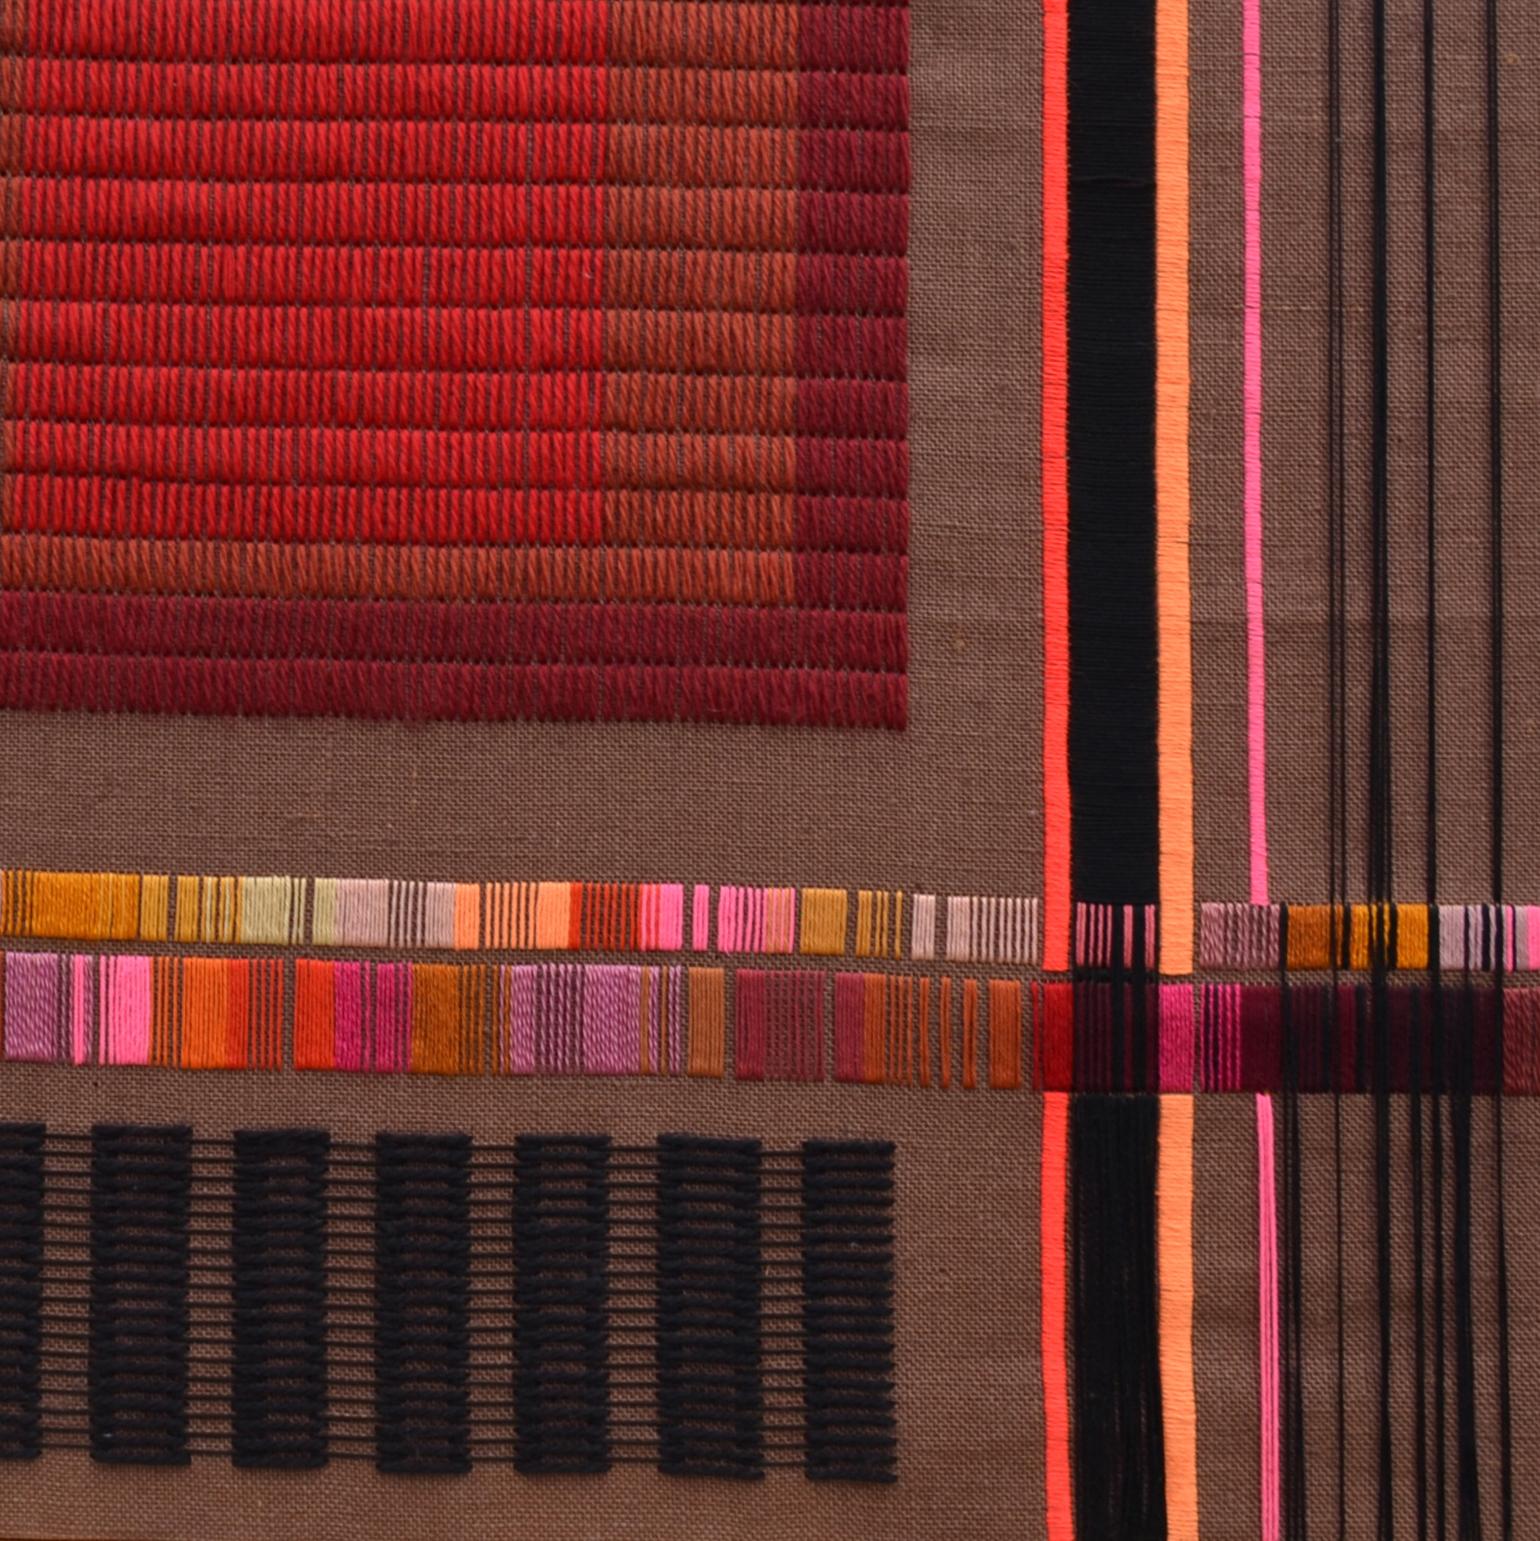 Vibrant abstract geometric textile artwork by Delphine A. Davidson (signed), Edinburgh, circa 1970-1980. The composition of horizontal and vertical lines is embroidered in bright colored wool on a brown loosely woven fabric that is stretched over a